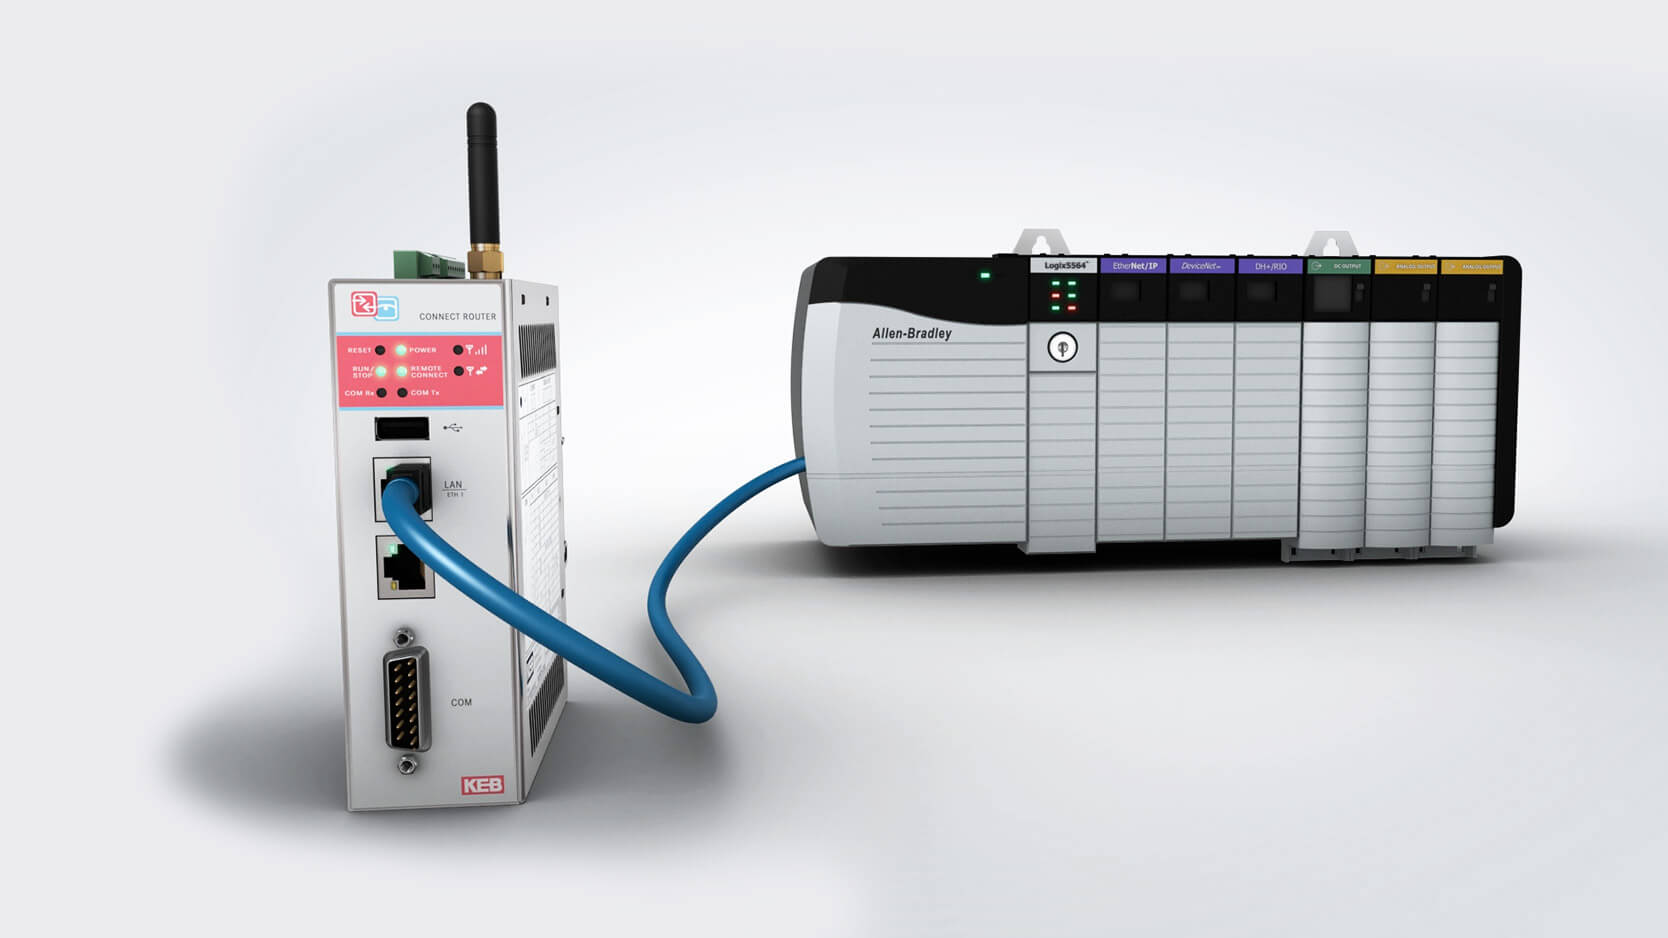 KEB C6 Industrial Router connected to Allen Bradley PLC